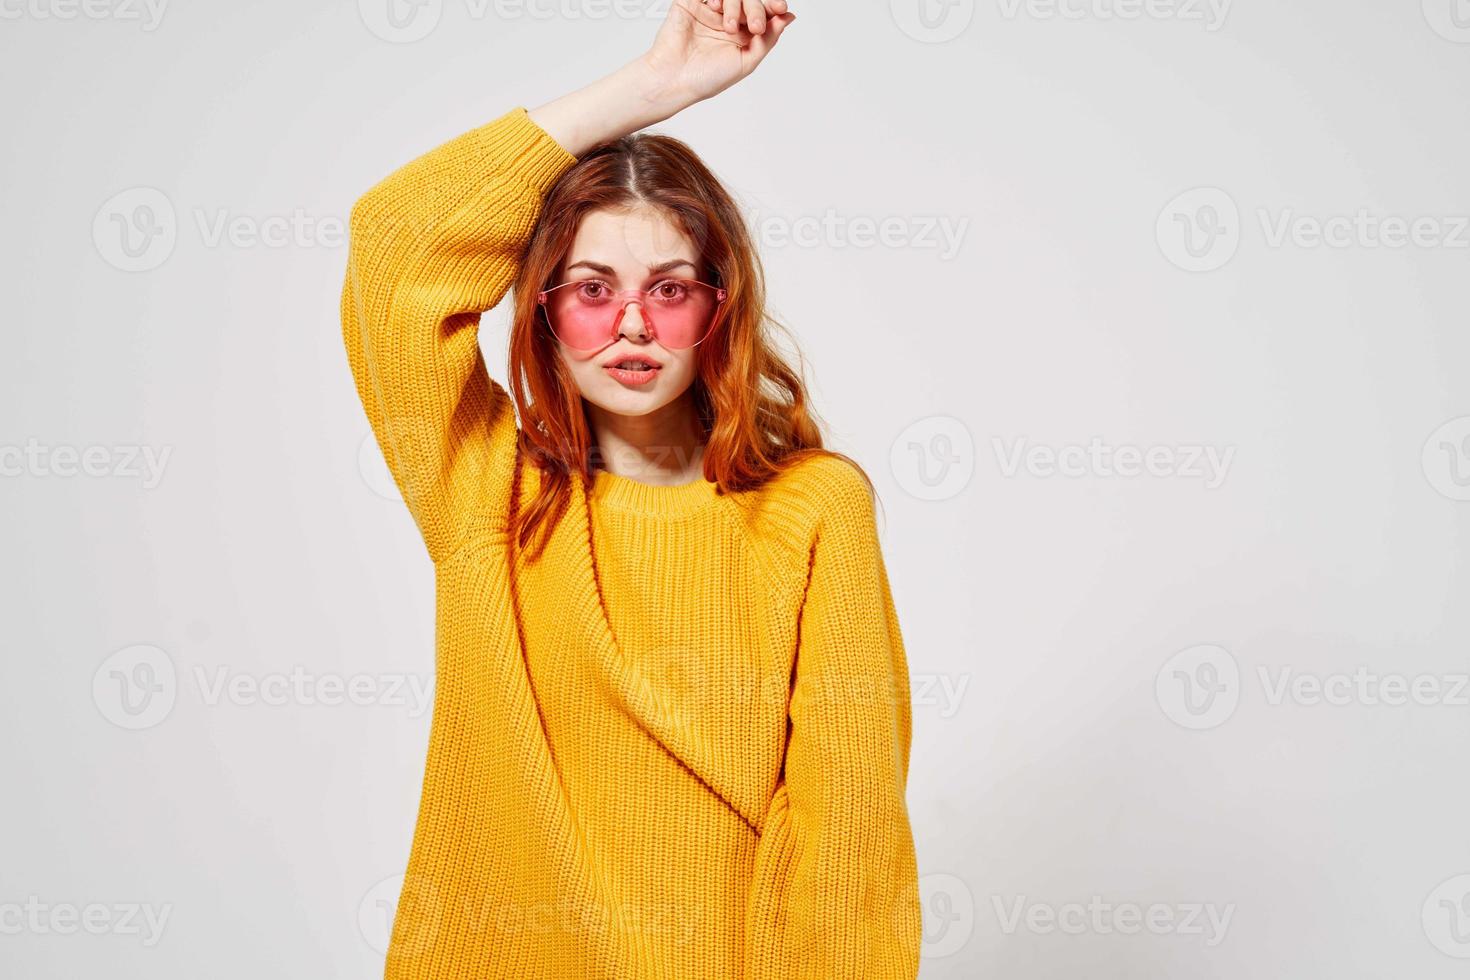 portrait of a woman in a yellow sweater hairstyle light background photo